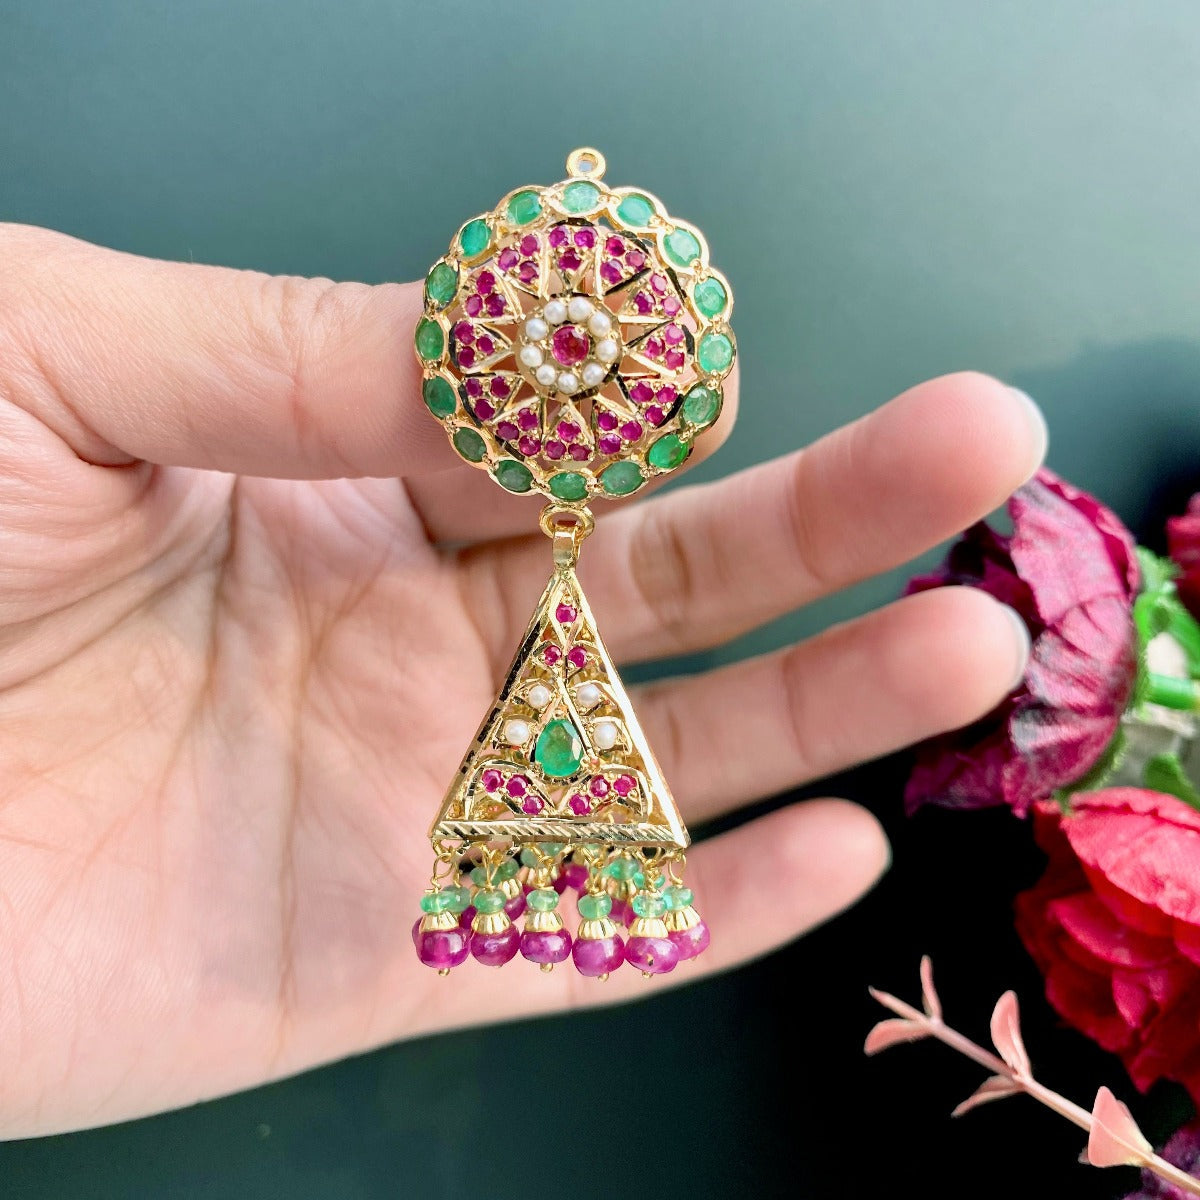 rajasthani gold jhumka earrings for women made with jadau technique